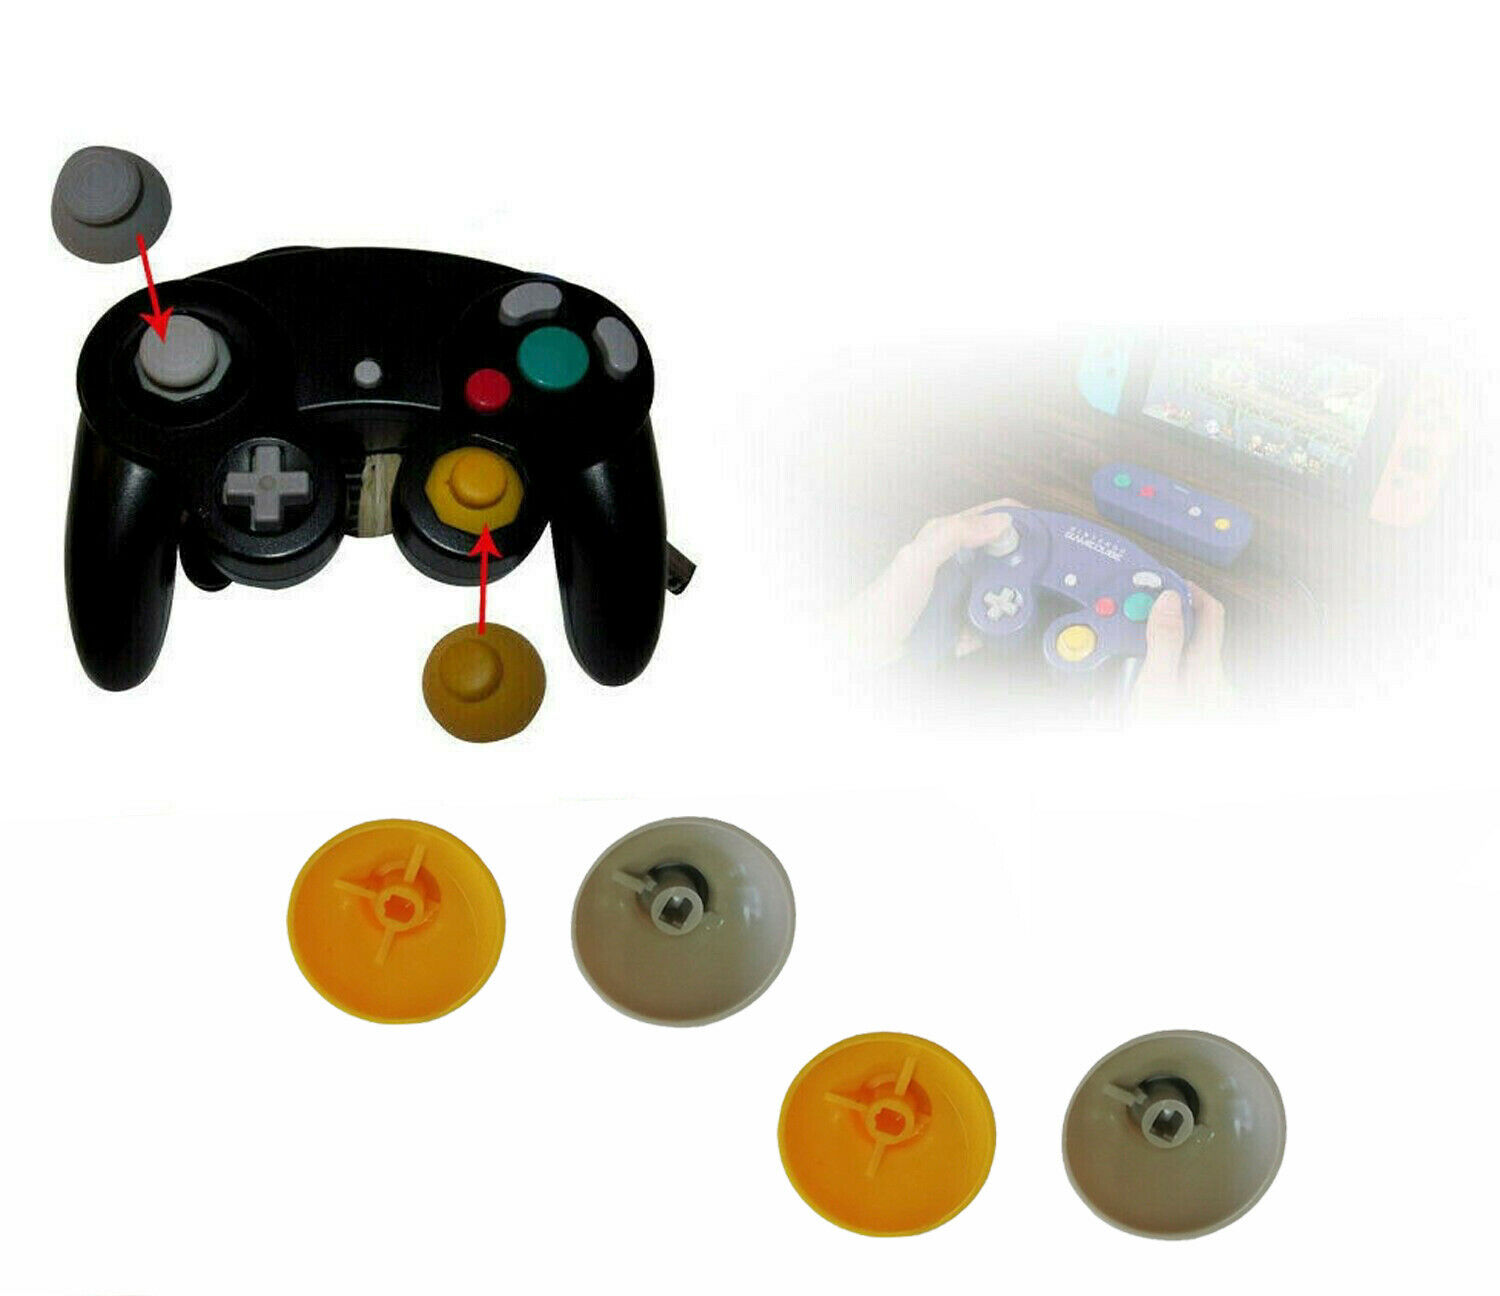 2 YELLOW + 2 GRAY  Thumbstick Joystick Caps For Gamecube Controller Unbranded Does not apply - фотография #2